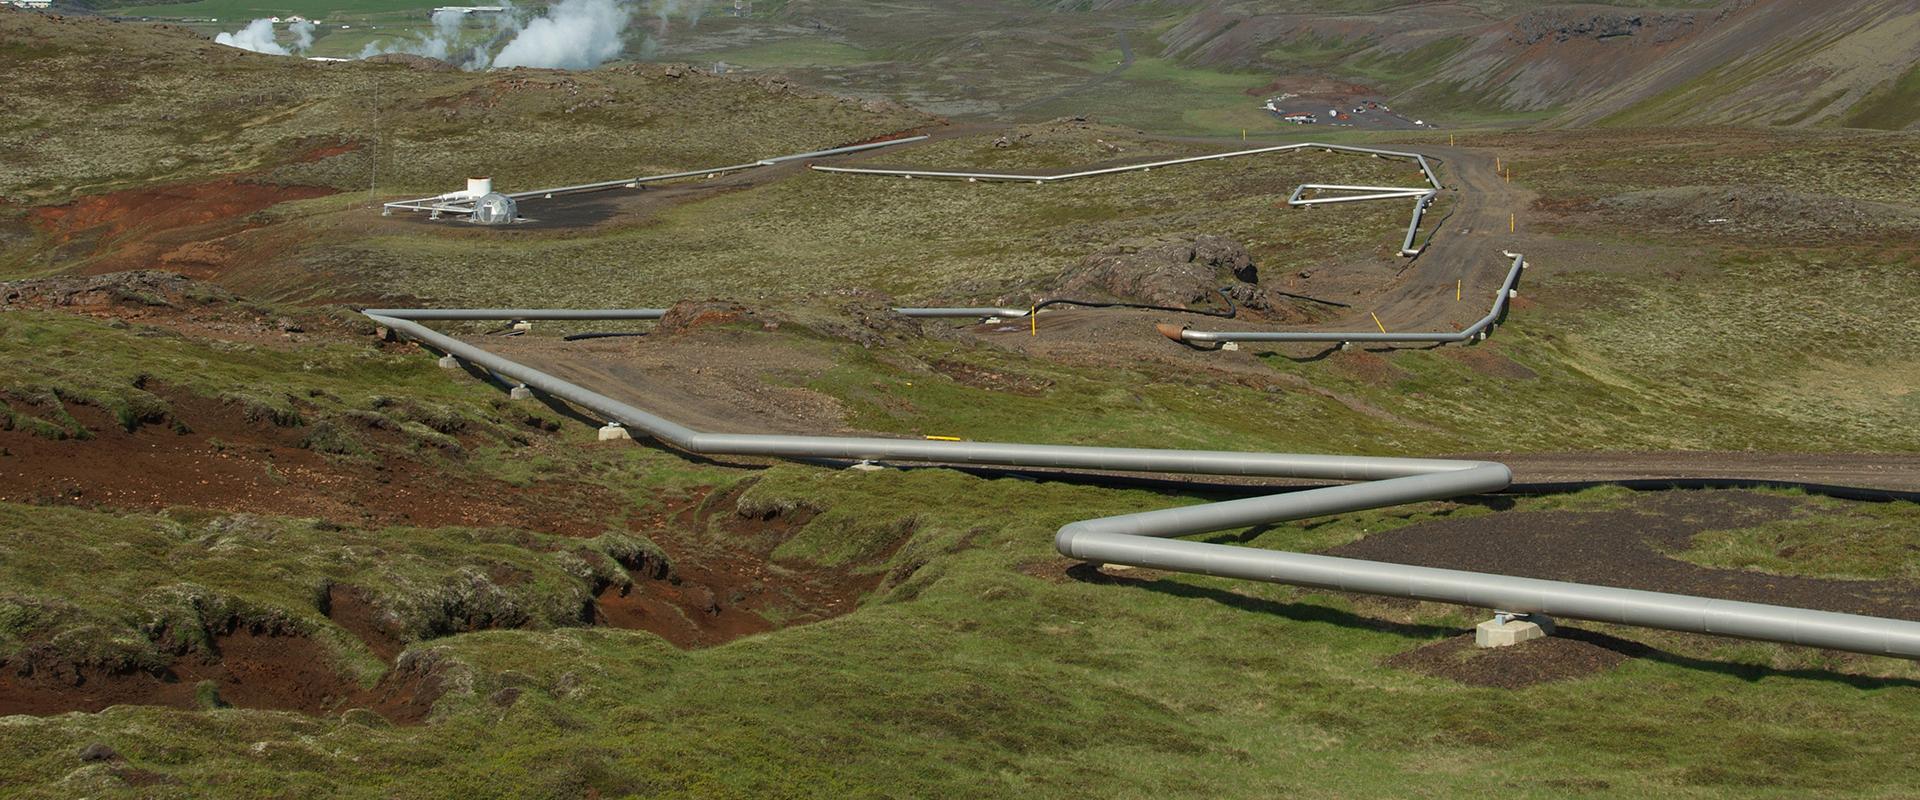 A sampling operation at a geothermal well, Iceland